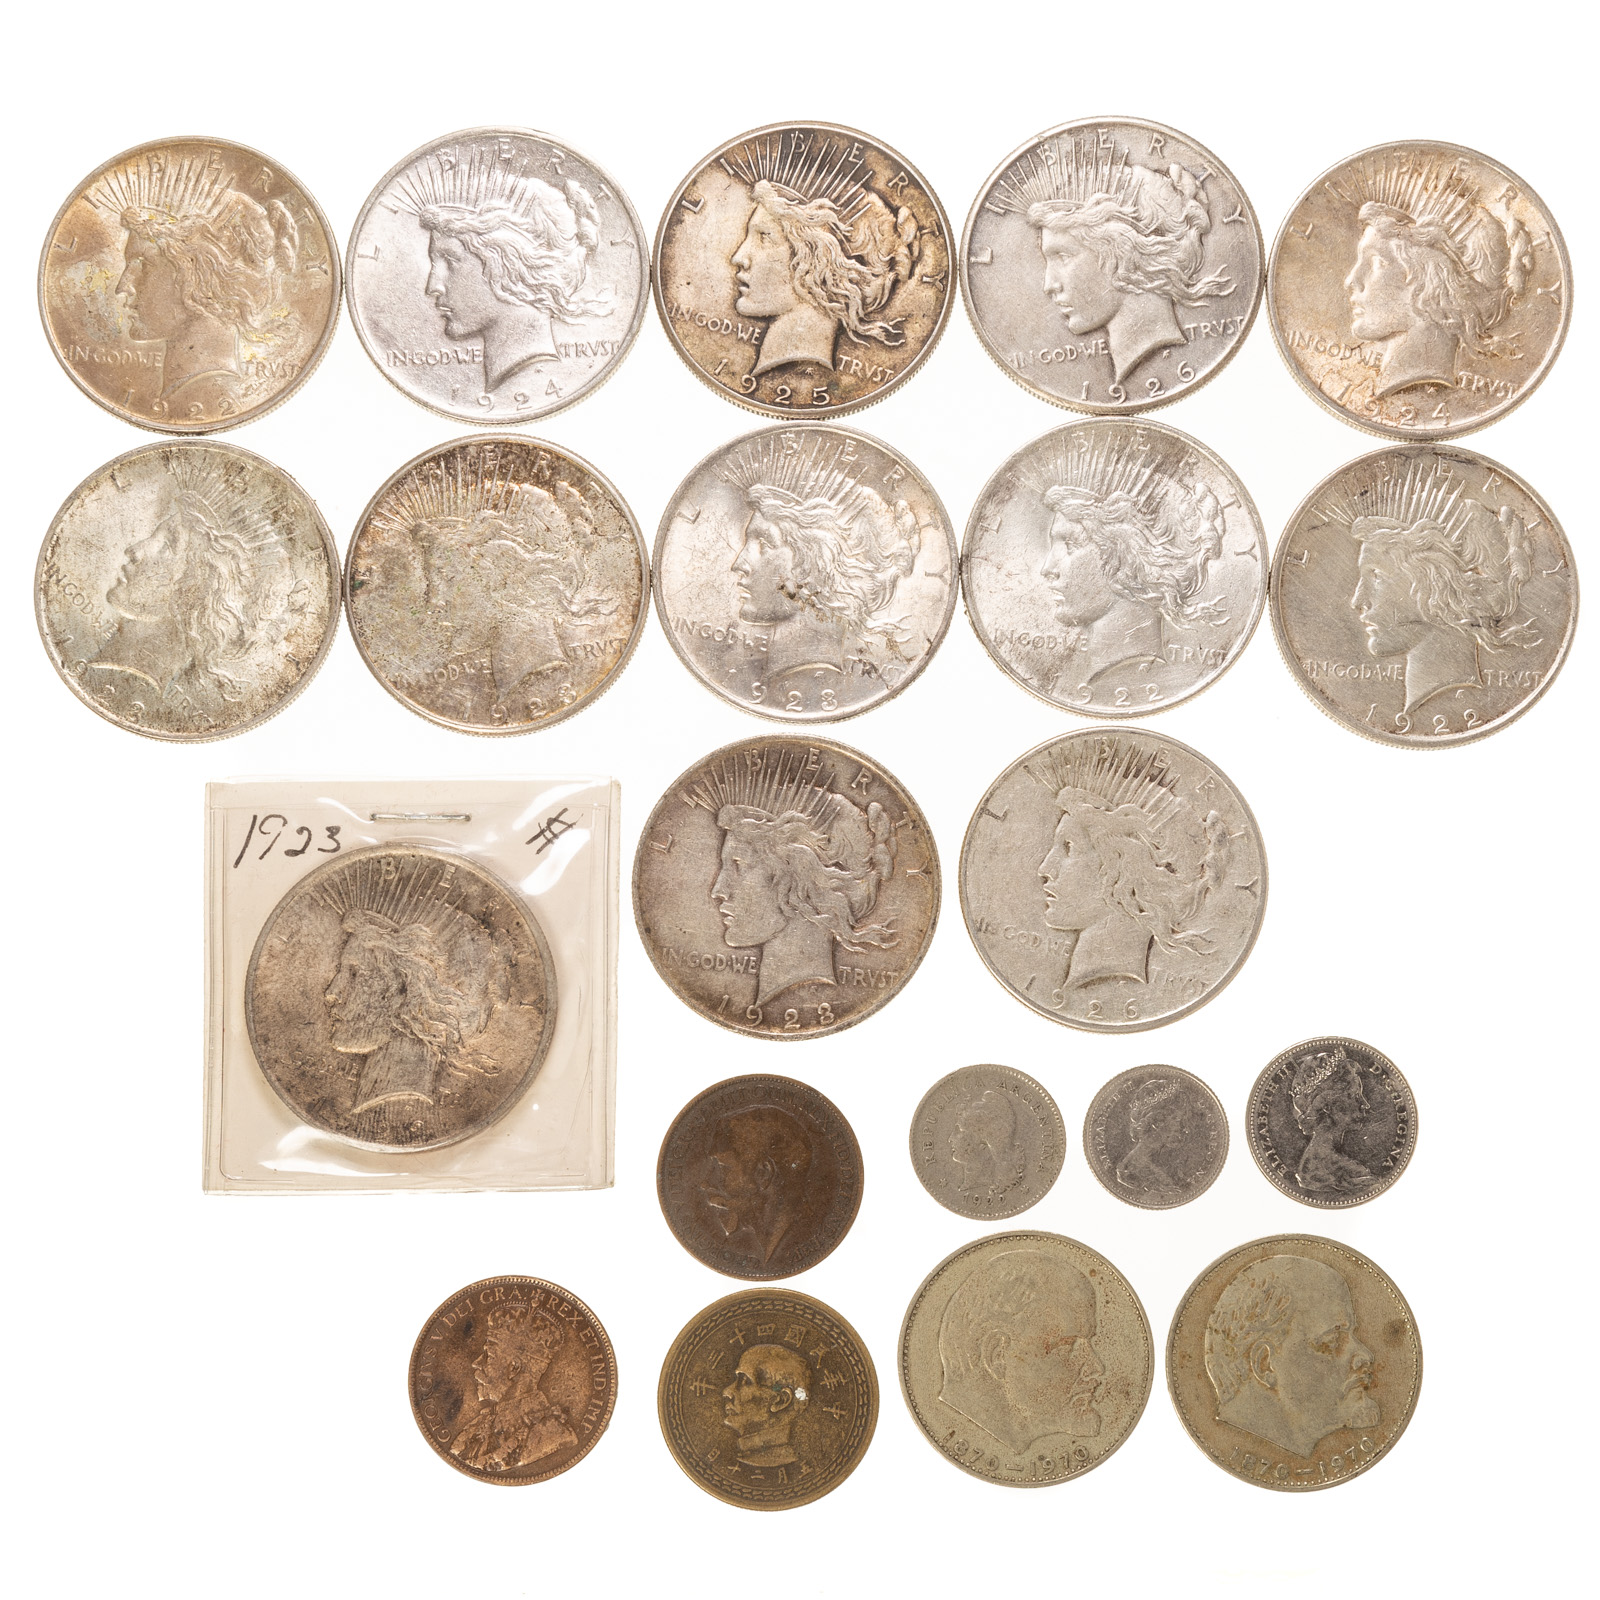 FAMILY COIN COLLECTION, INCLUDES